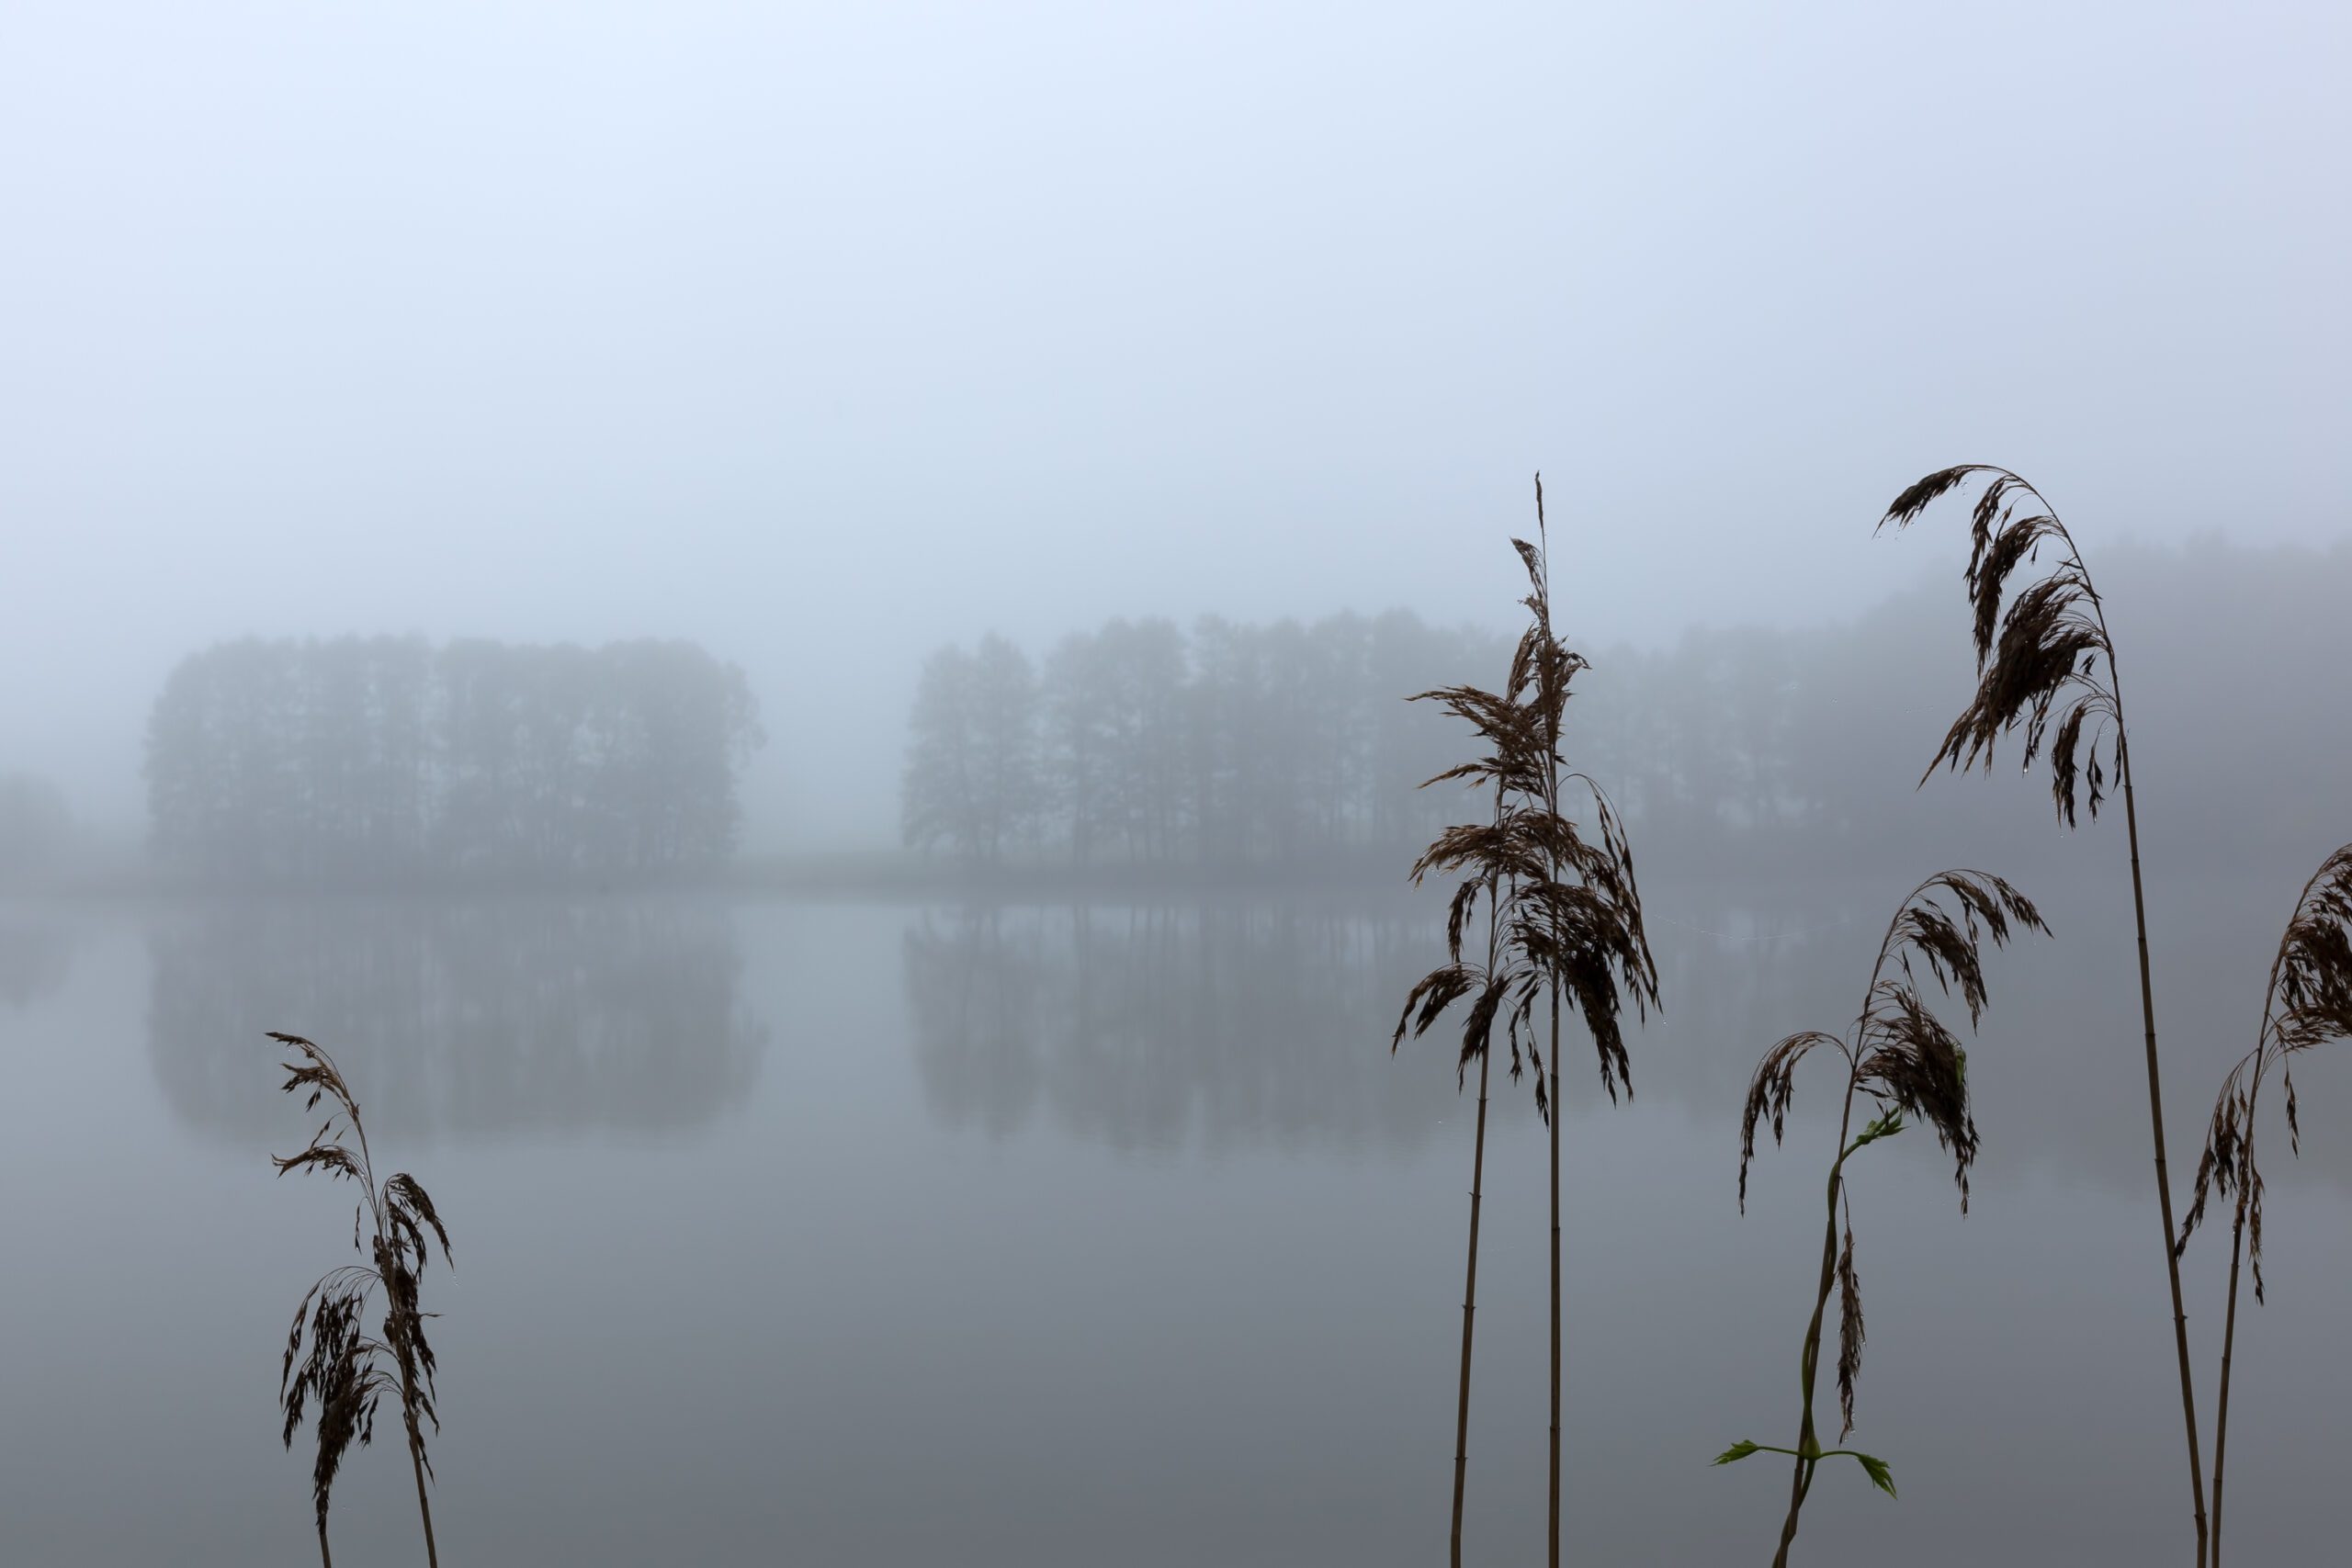 A tranquil depiction of Sudoměř Pond at dawn, where mist meets the soft embrace of reeds and distant shores whisper secrets